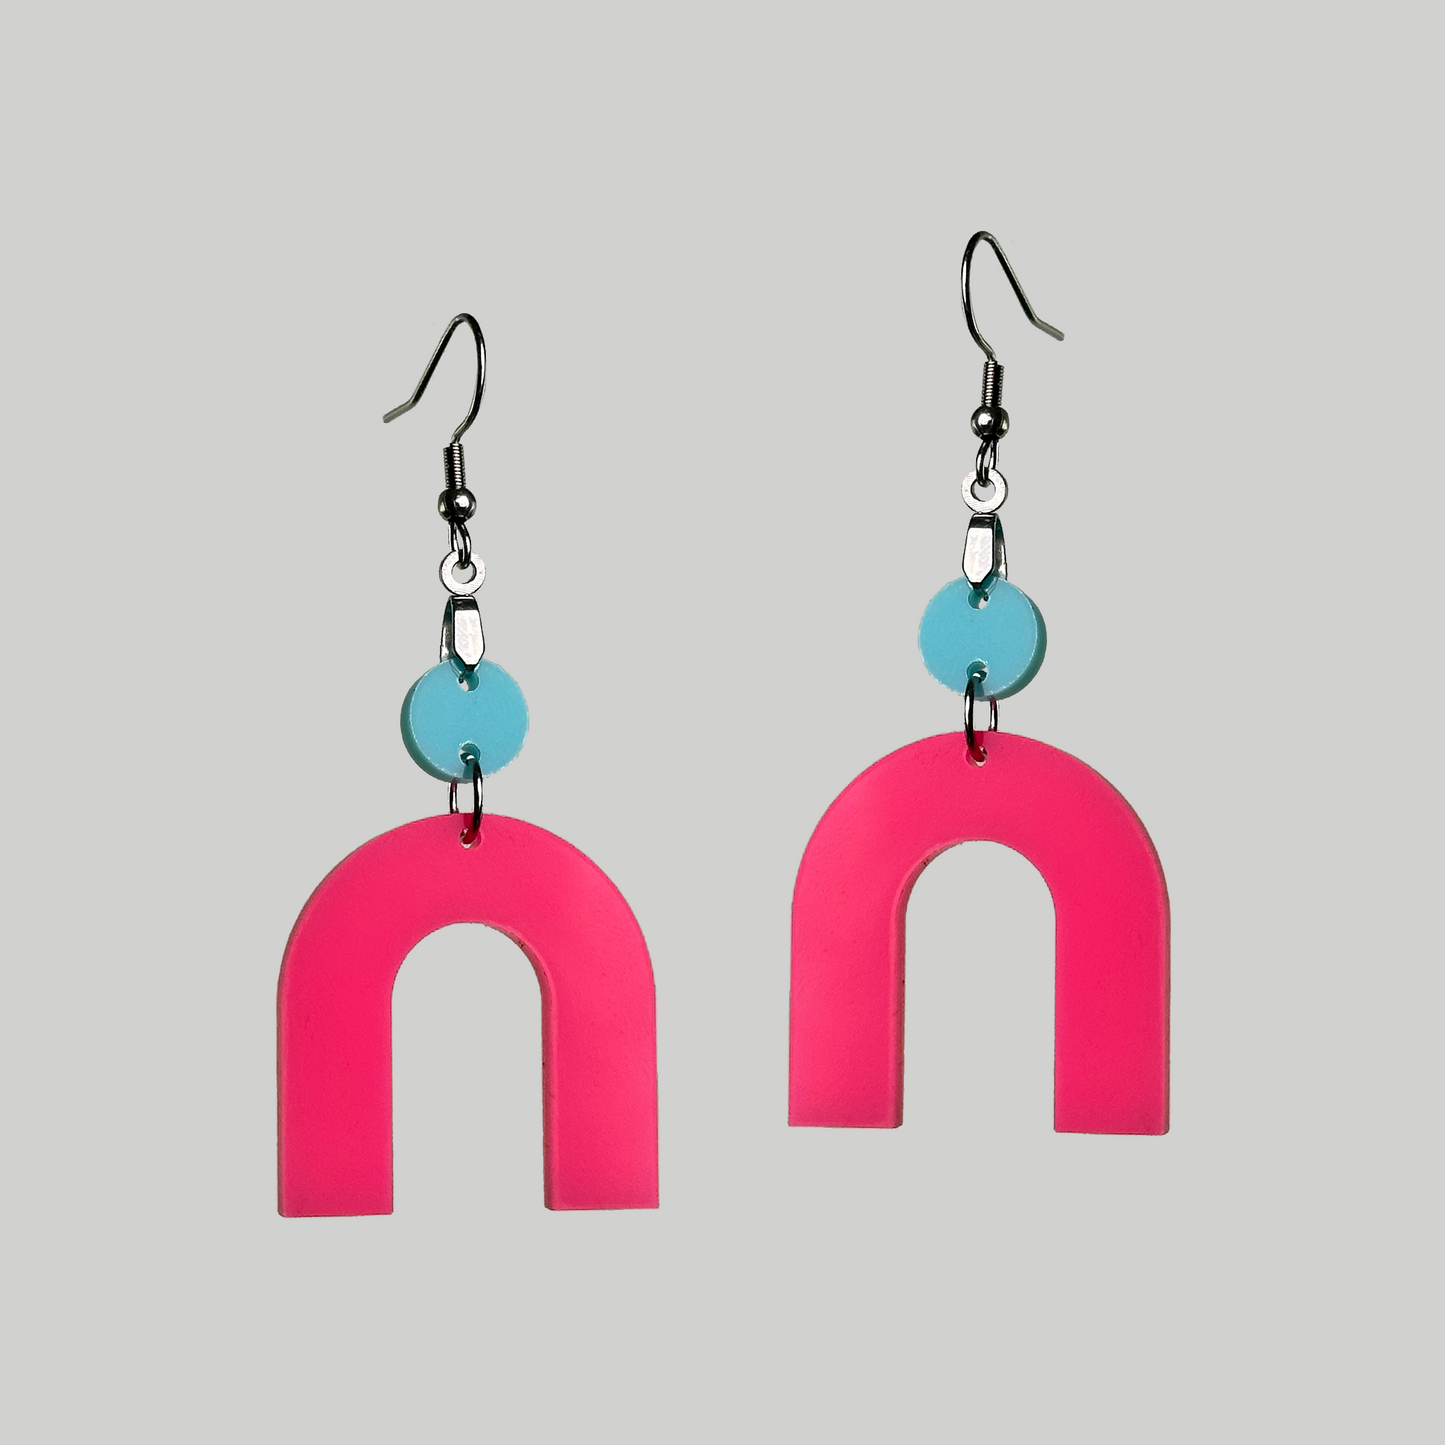 Chic Acrylic Earrings for Trendsetting: Statement accessories for a bold and fashionable look.